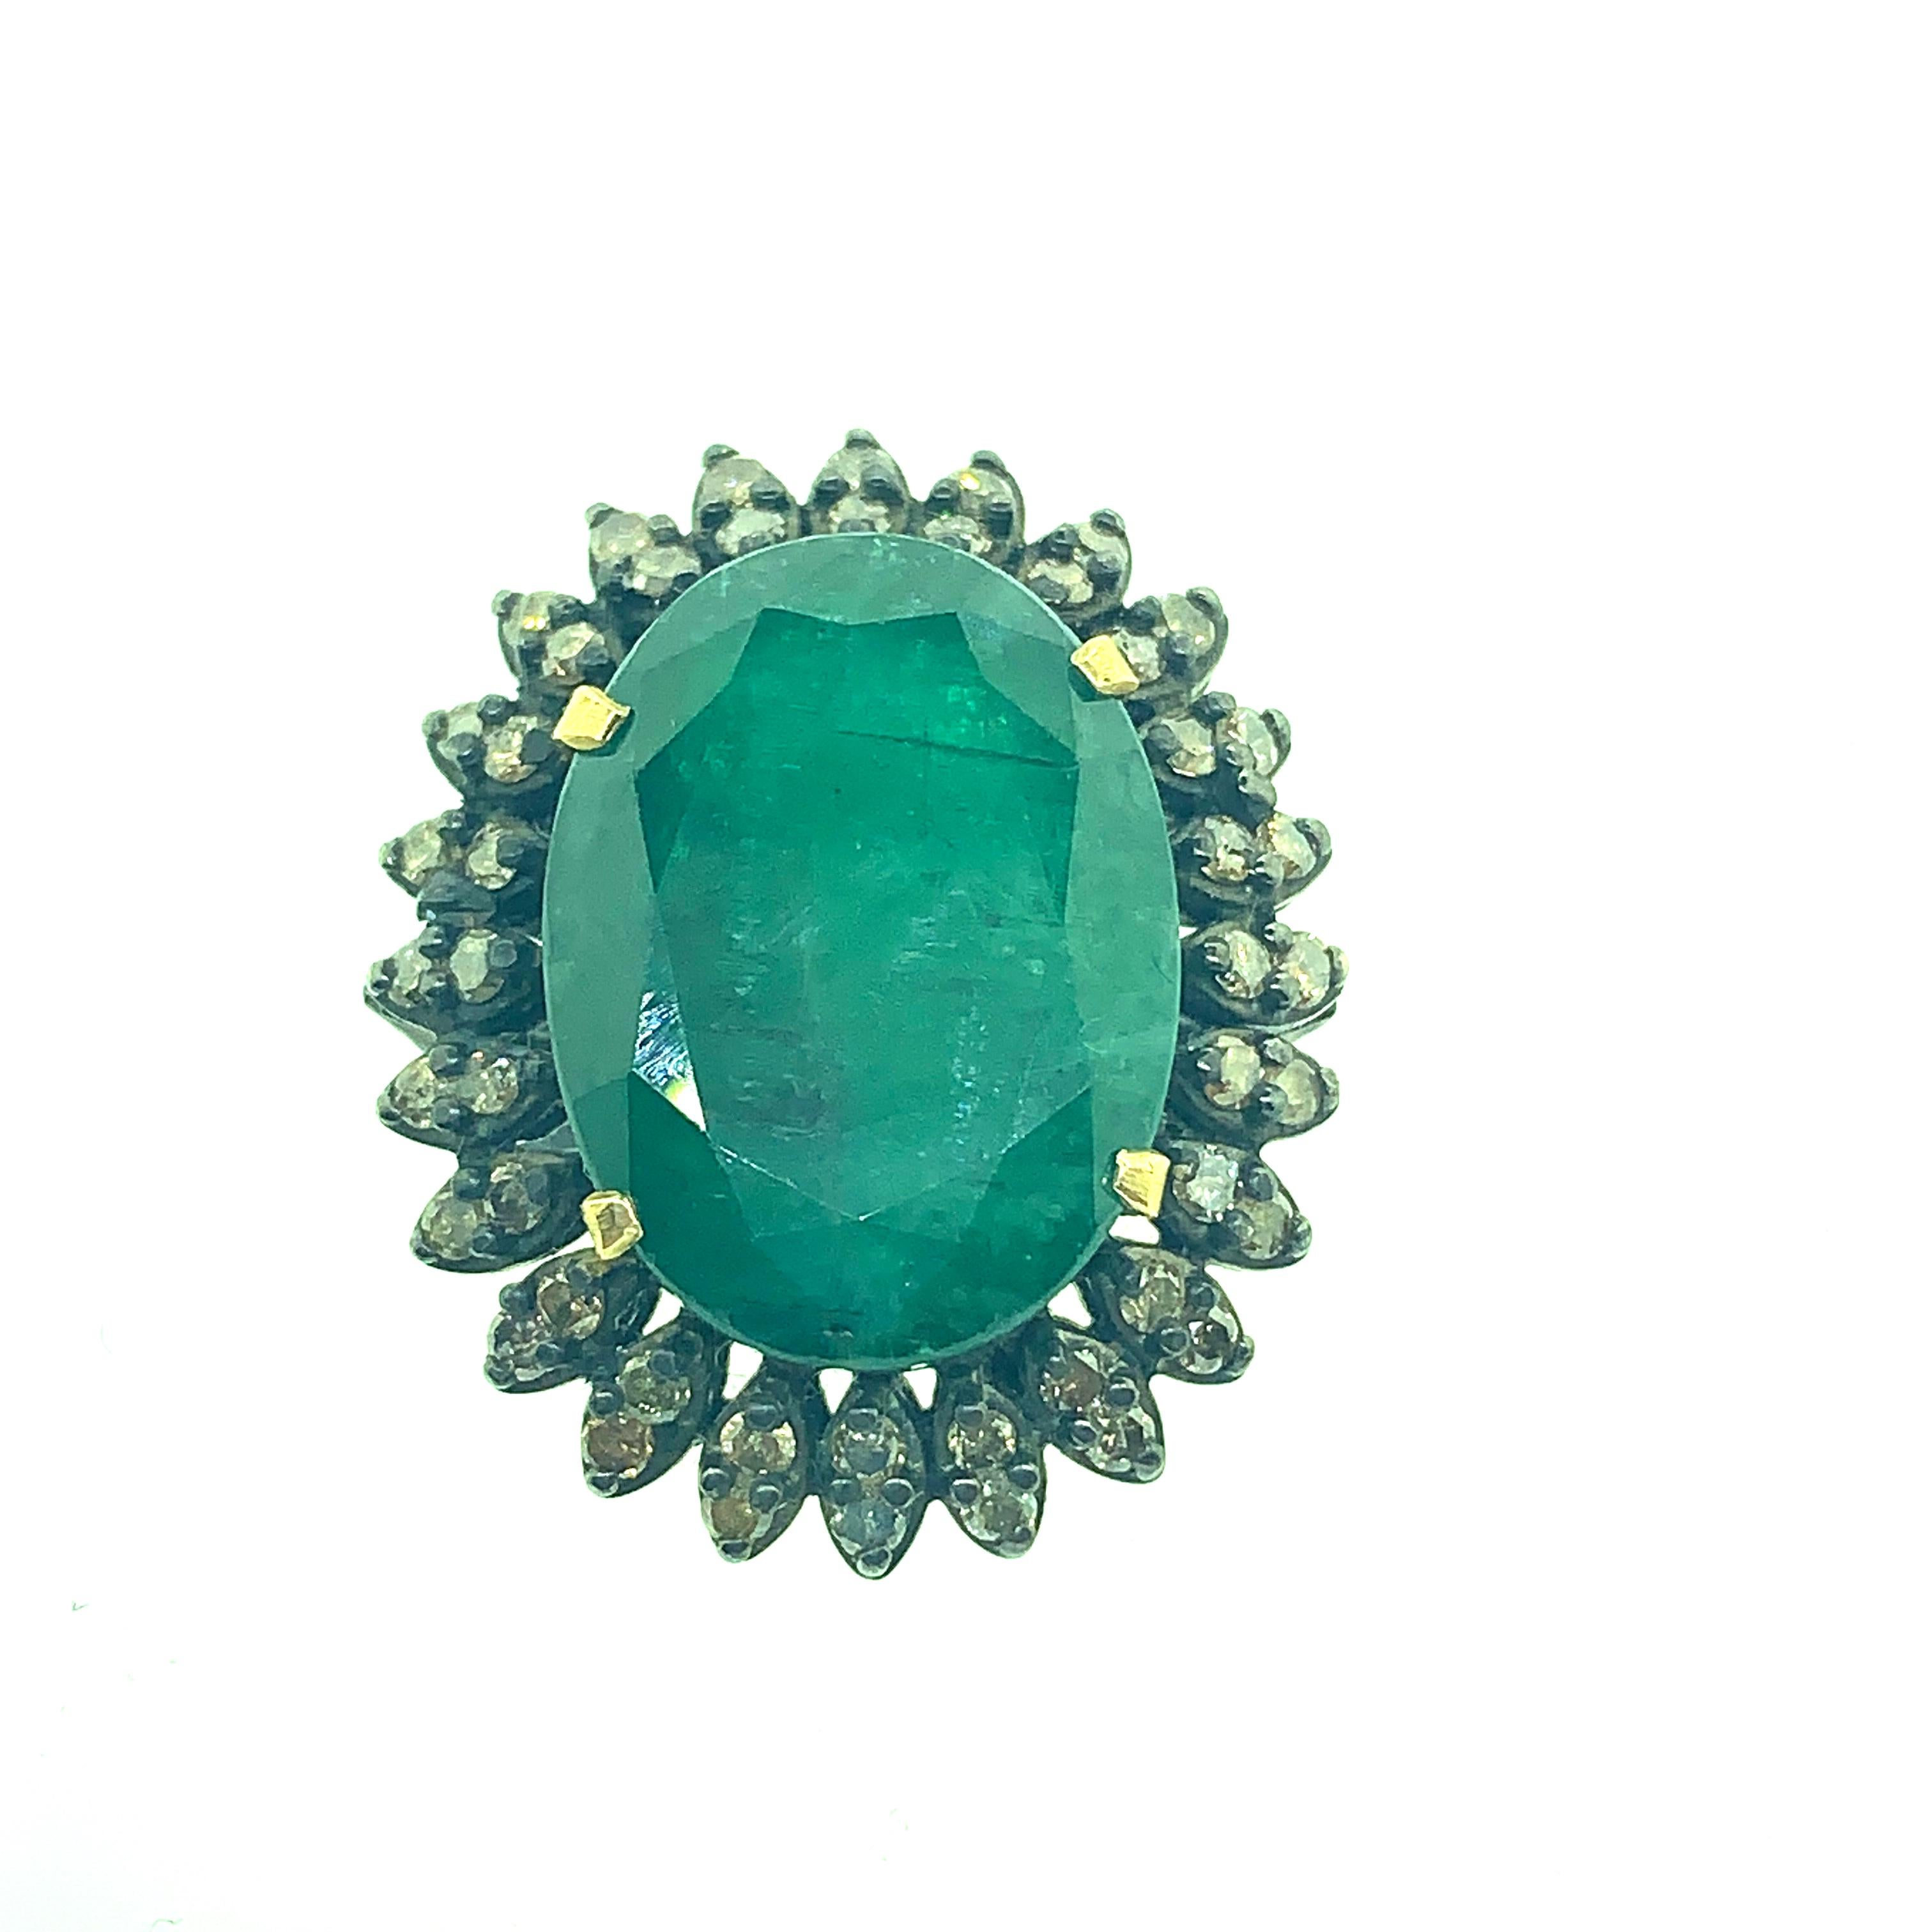 13.50 Carat Emerald, Diamond Ring in Oxidized Sterling Silver, 18 Karat Gold In New Condition For Sale In New York, NY